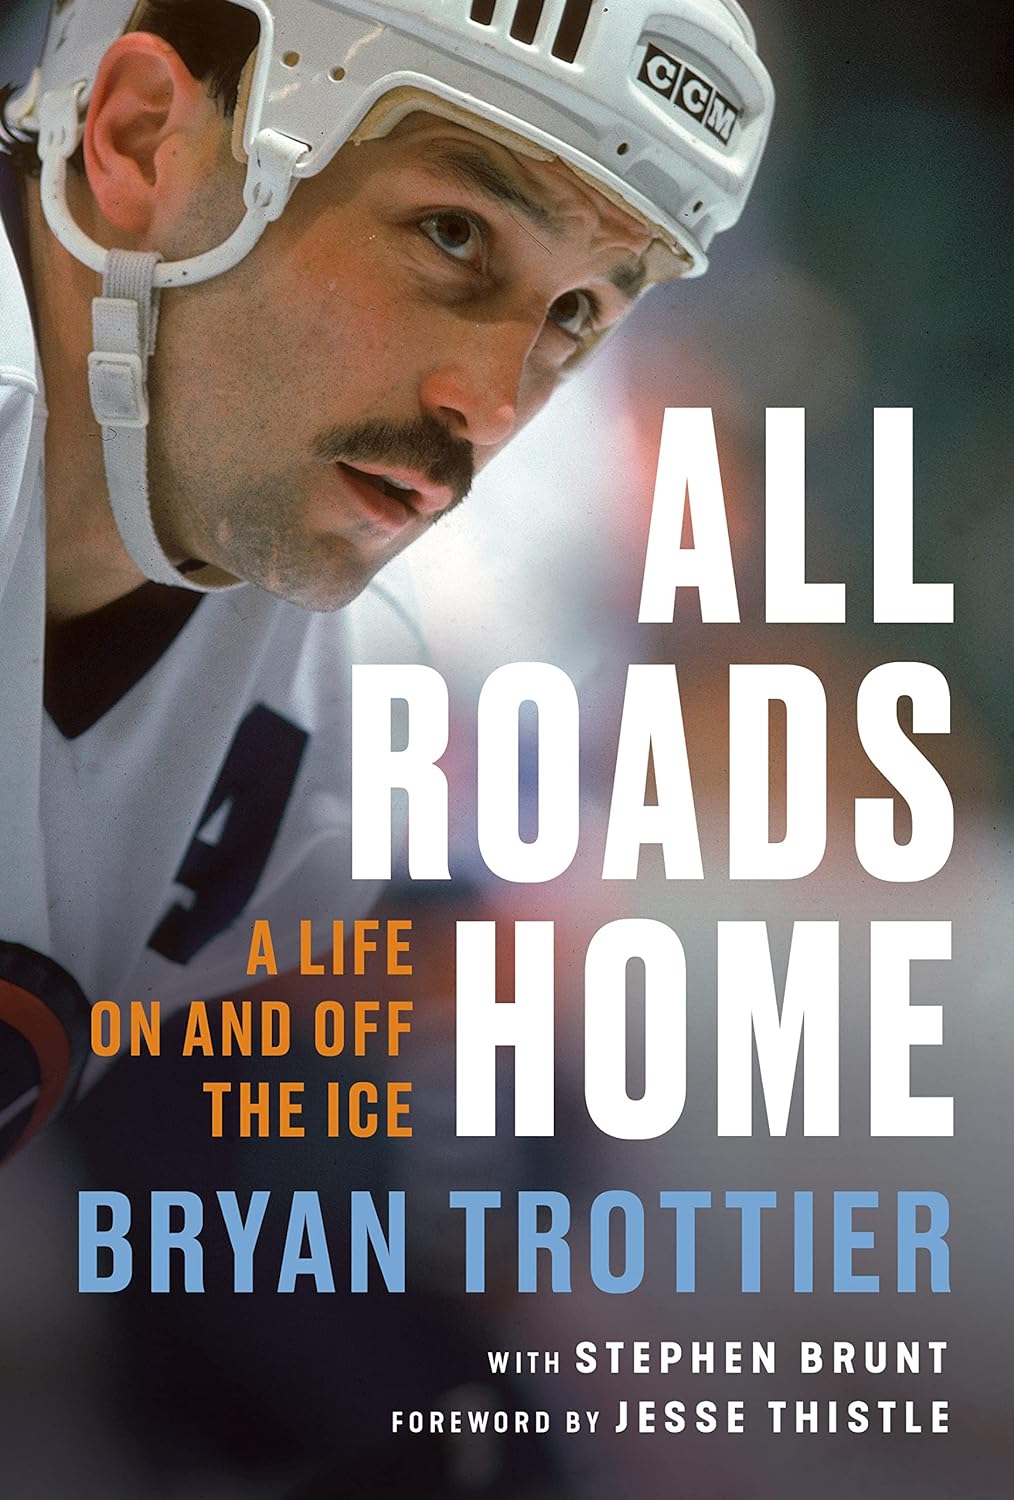 All Roads Home: A Life On and Off the Ice - Bryan Trottier (Pre-Loved)